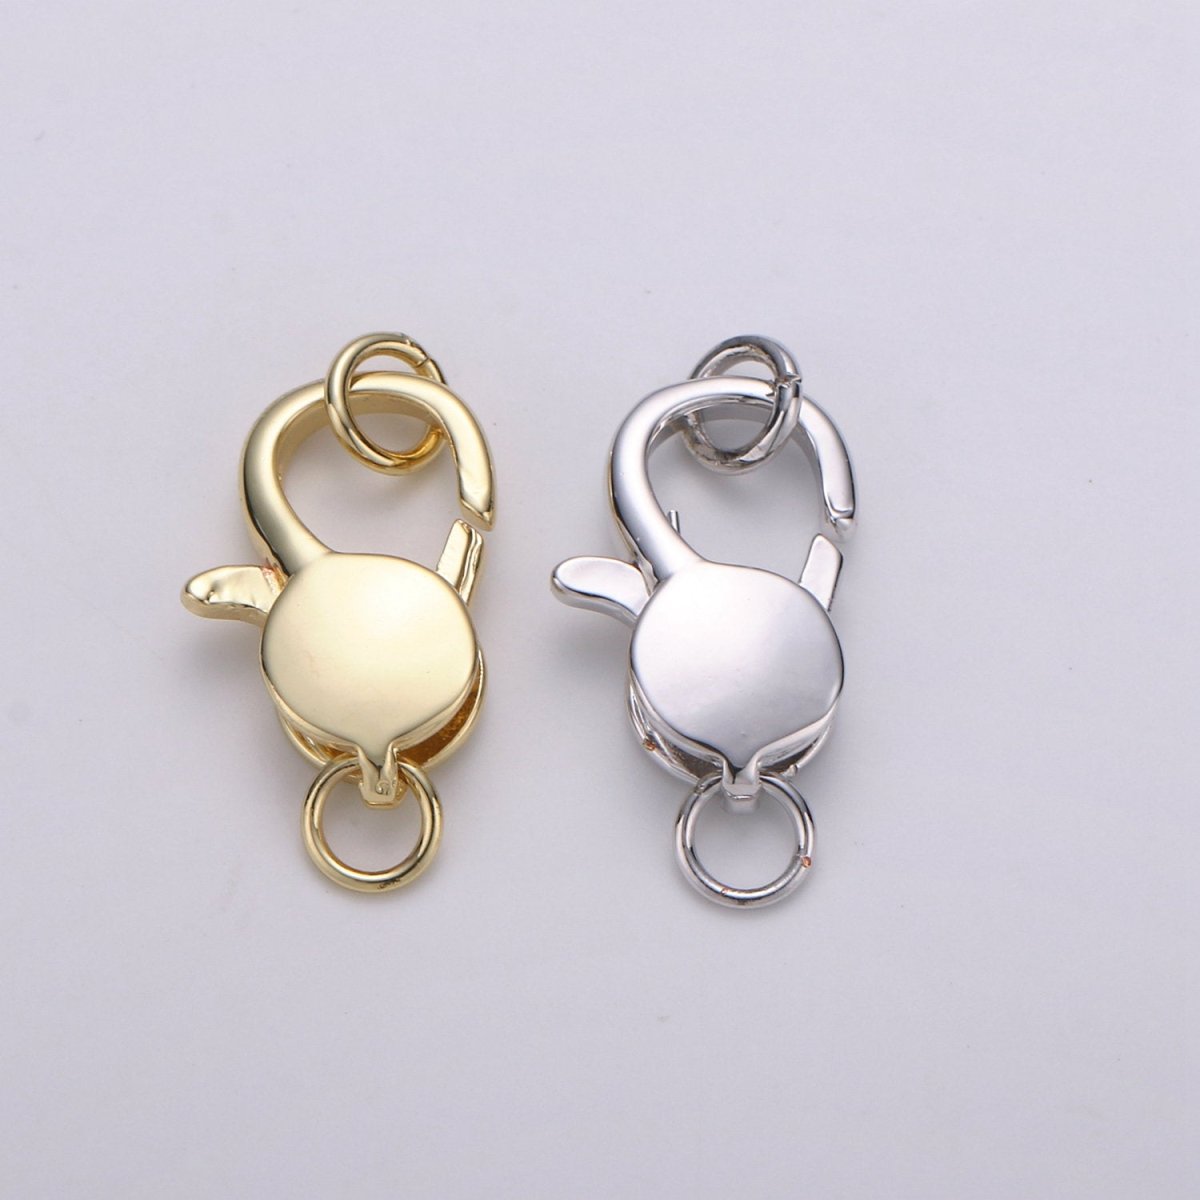 Wholesale Lobster Clasp 14k Gold Filled, Lobster Claw with Jump Ring for Jewelry Necklace Bracelet Anklet Making, Size 20mmx10mm K-837 K-838 - DLUXCA